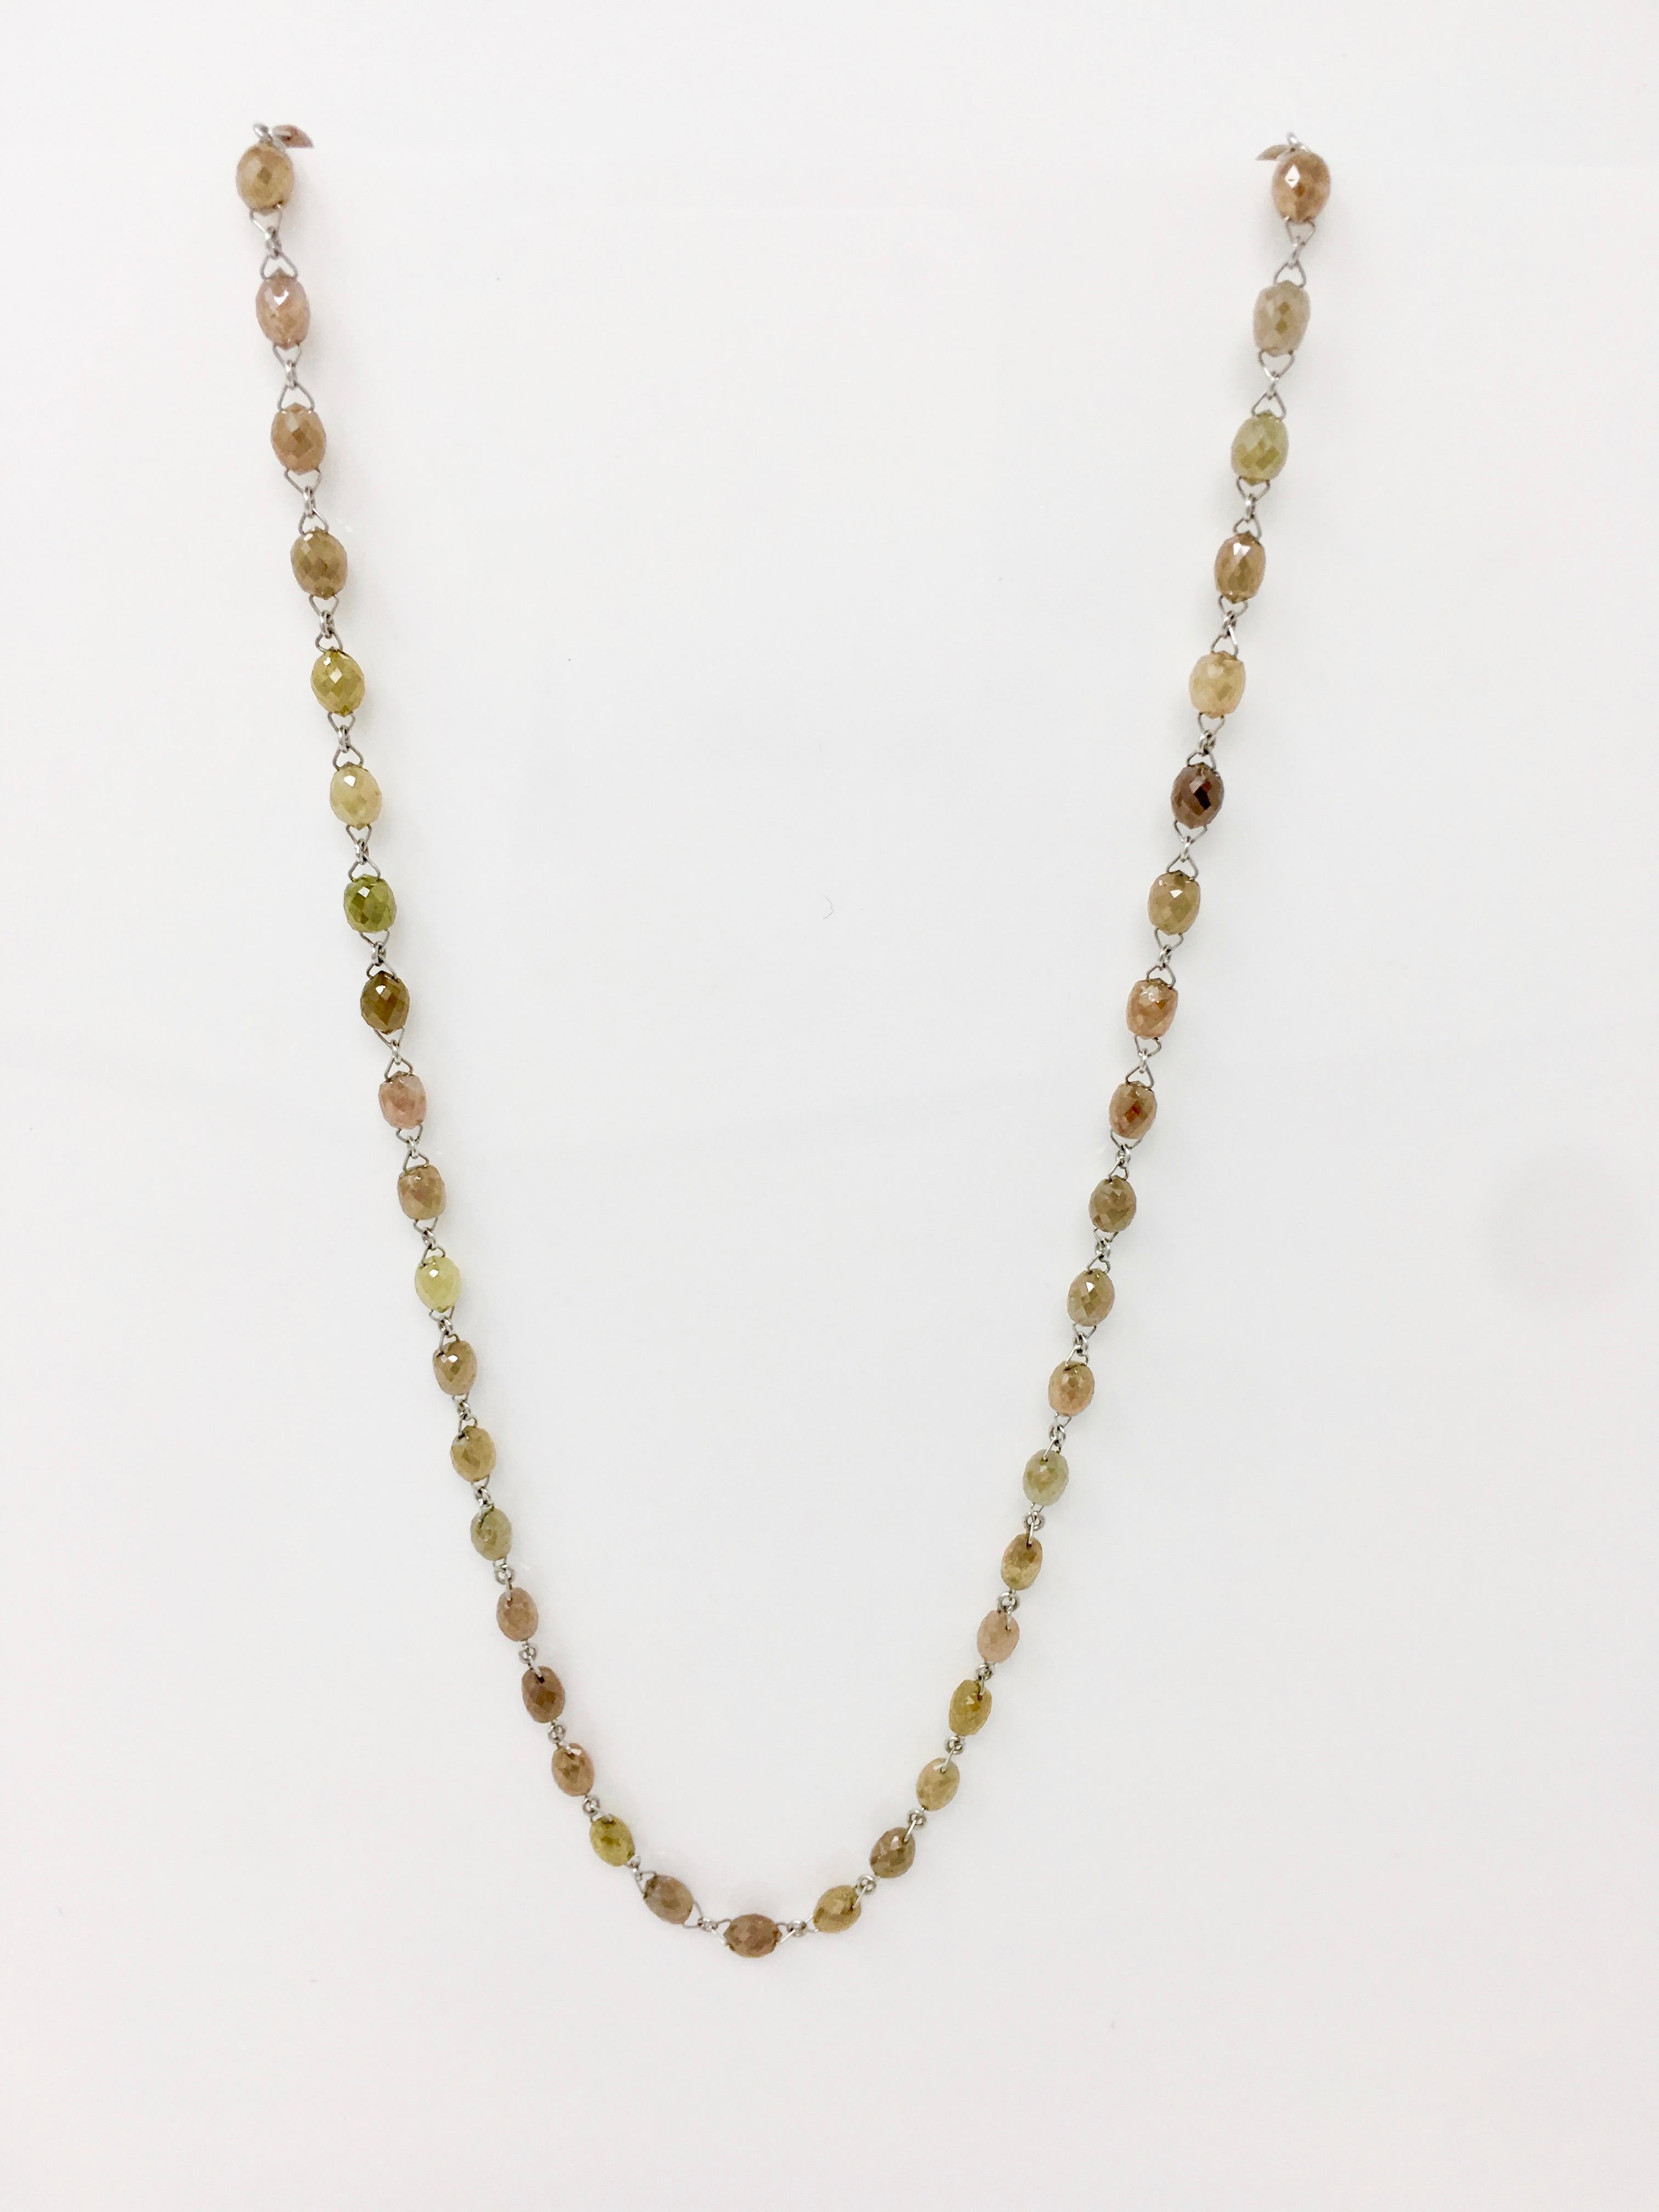 Simply elegant necklace featuring sparkling faceted multicolored  diamond beads ( with green, pink and brown hues ) weighing 40 carats. Handcrafted in USA by a master jeweler in 18k gold. Elegant and gracious, this 18 inches long necklace is a